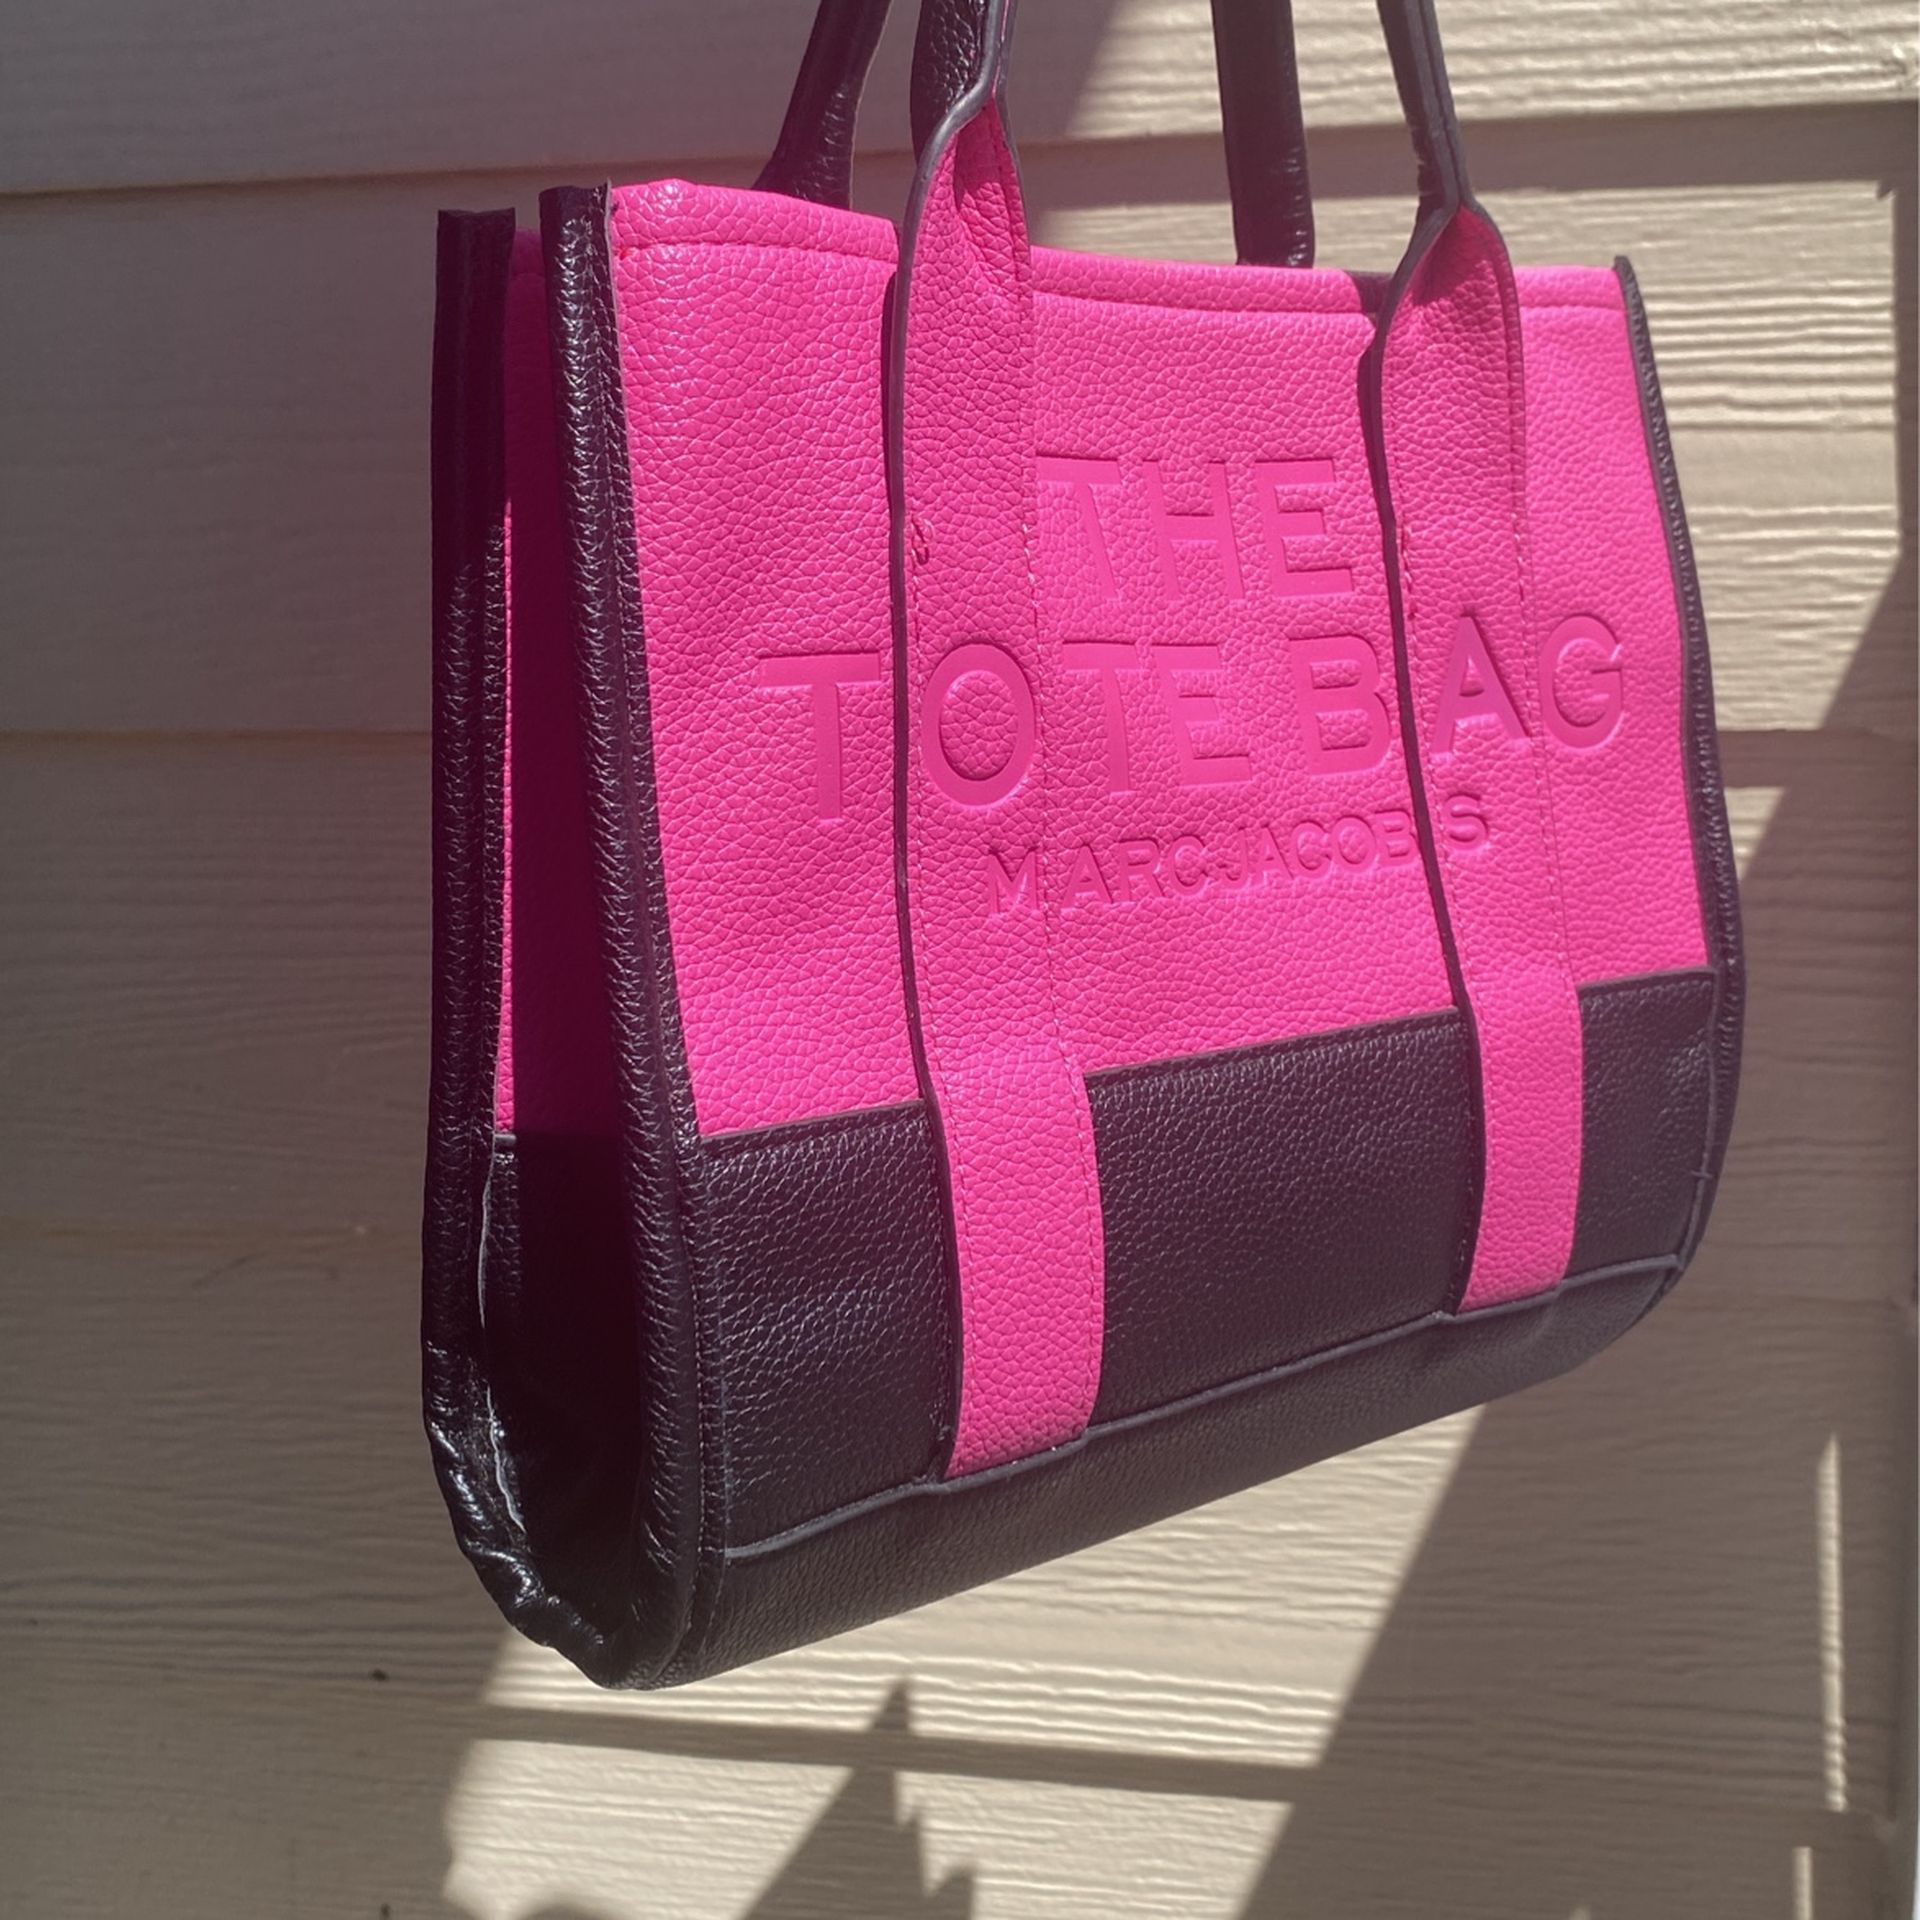 Marc Jacobs "The Tote Bag"